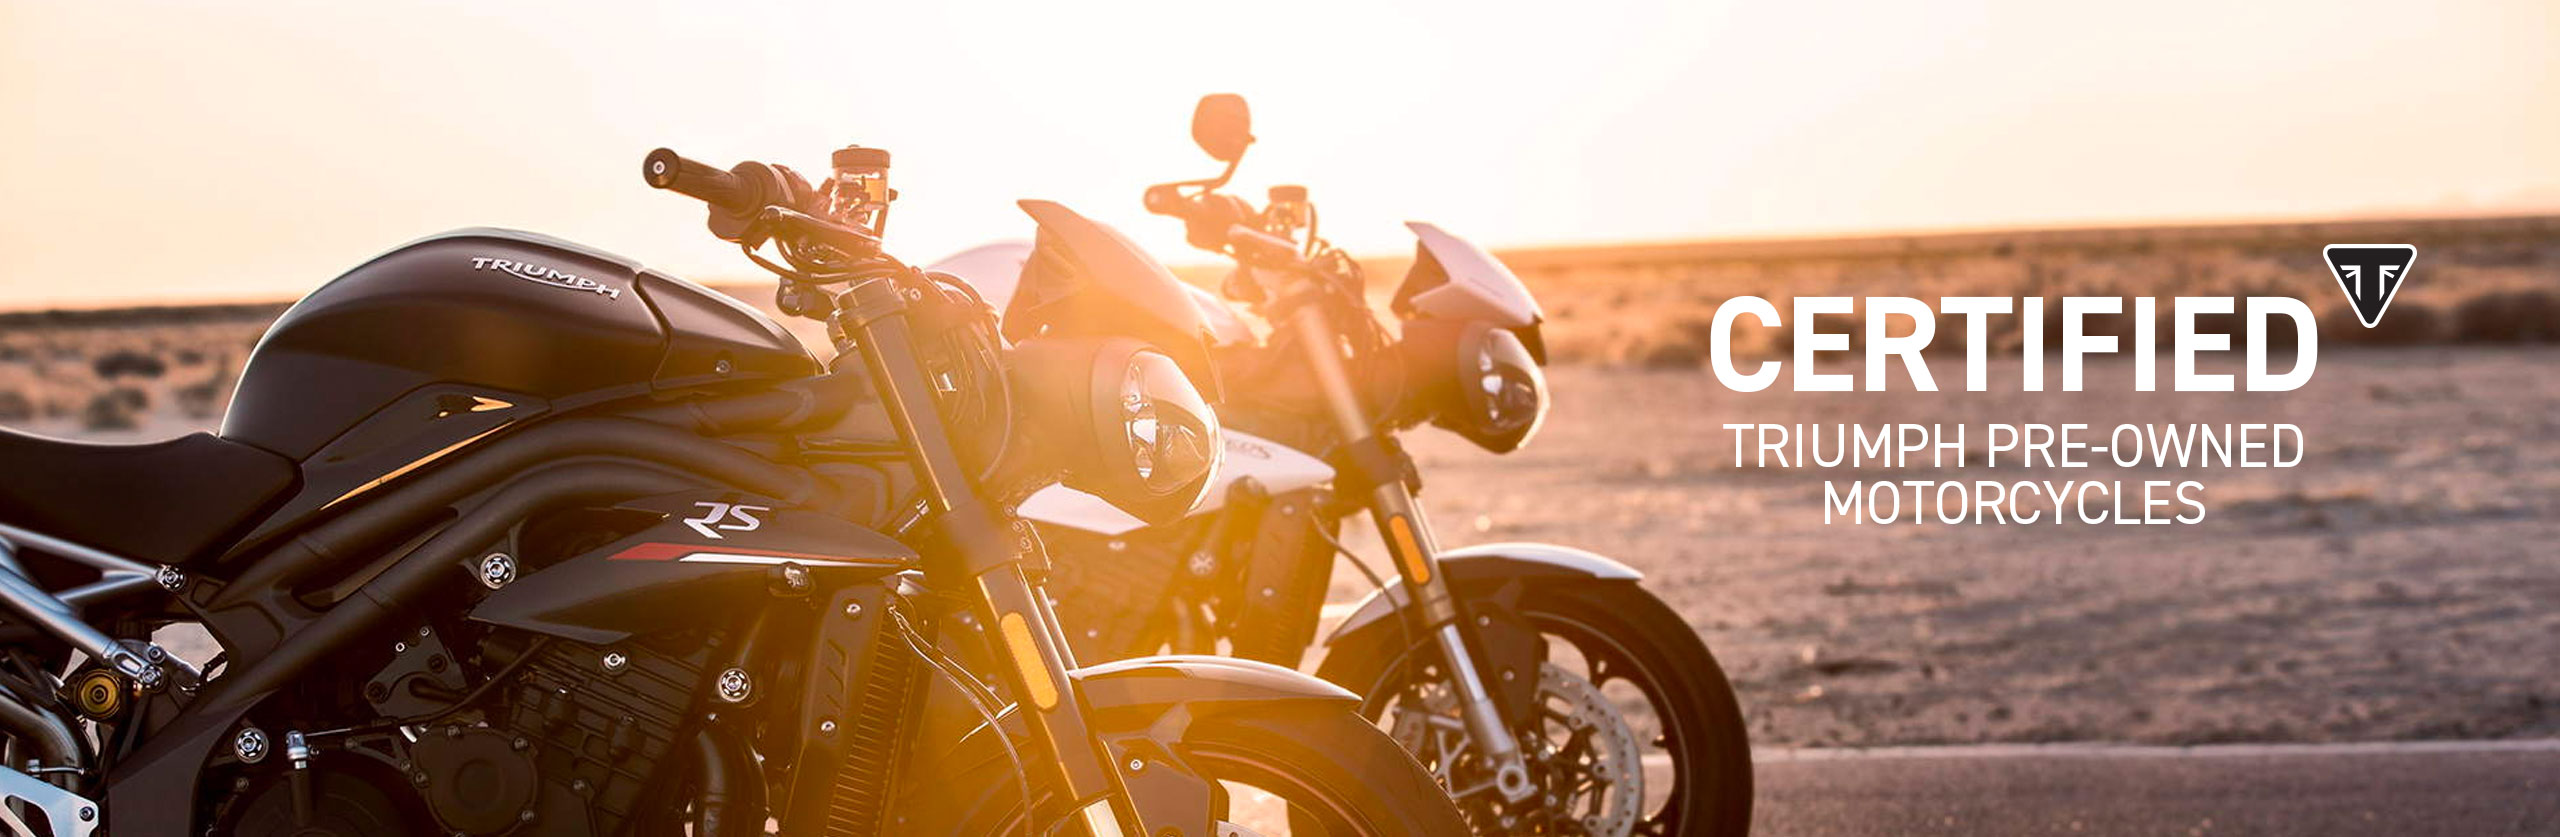 Certified Pro-Owned Motorcycles